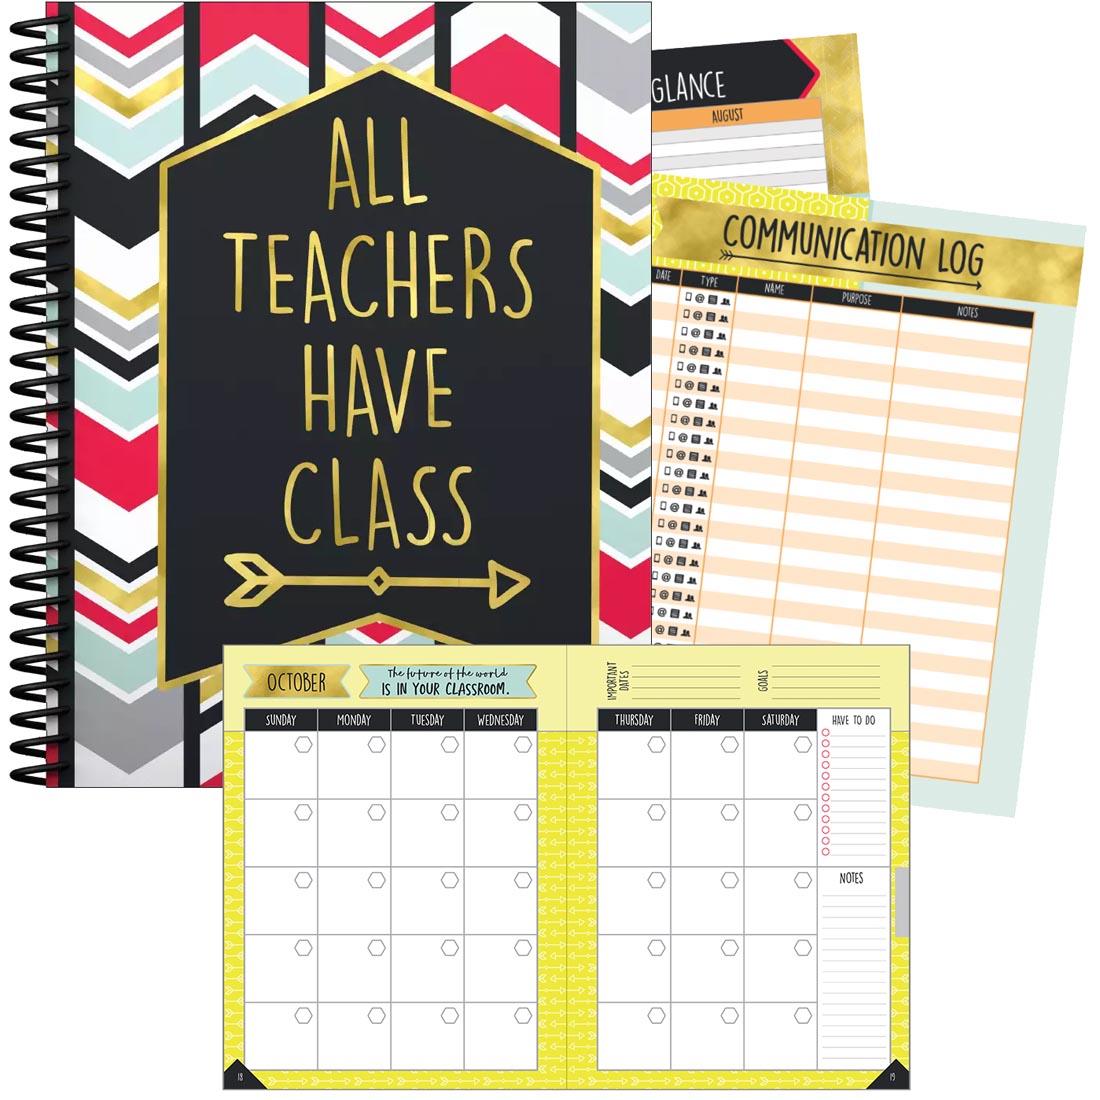 Teacher Planbook cover says All Teachers Have Class; sample inside pages shown